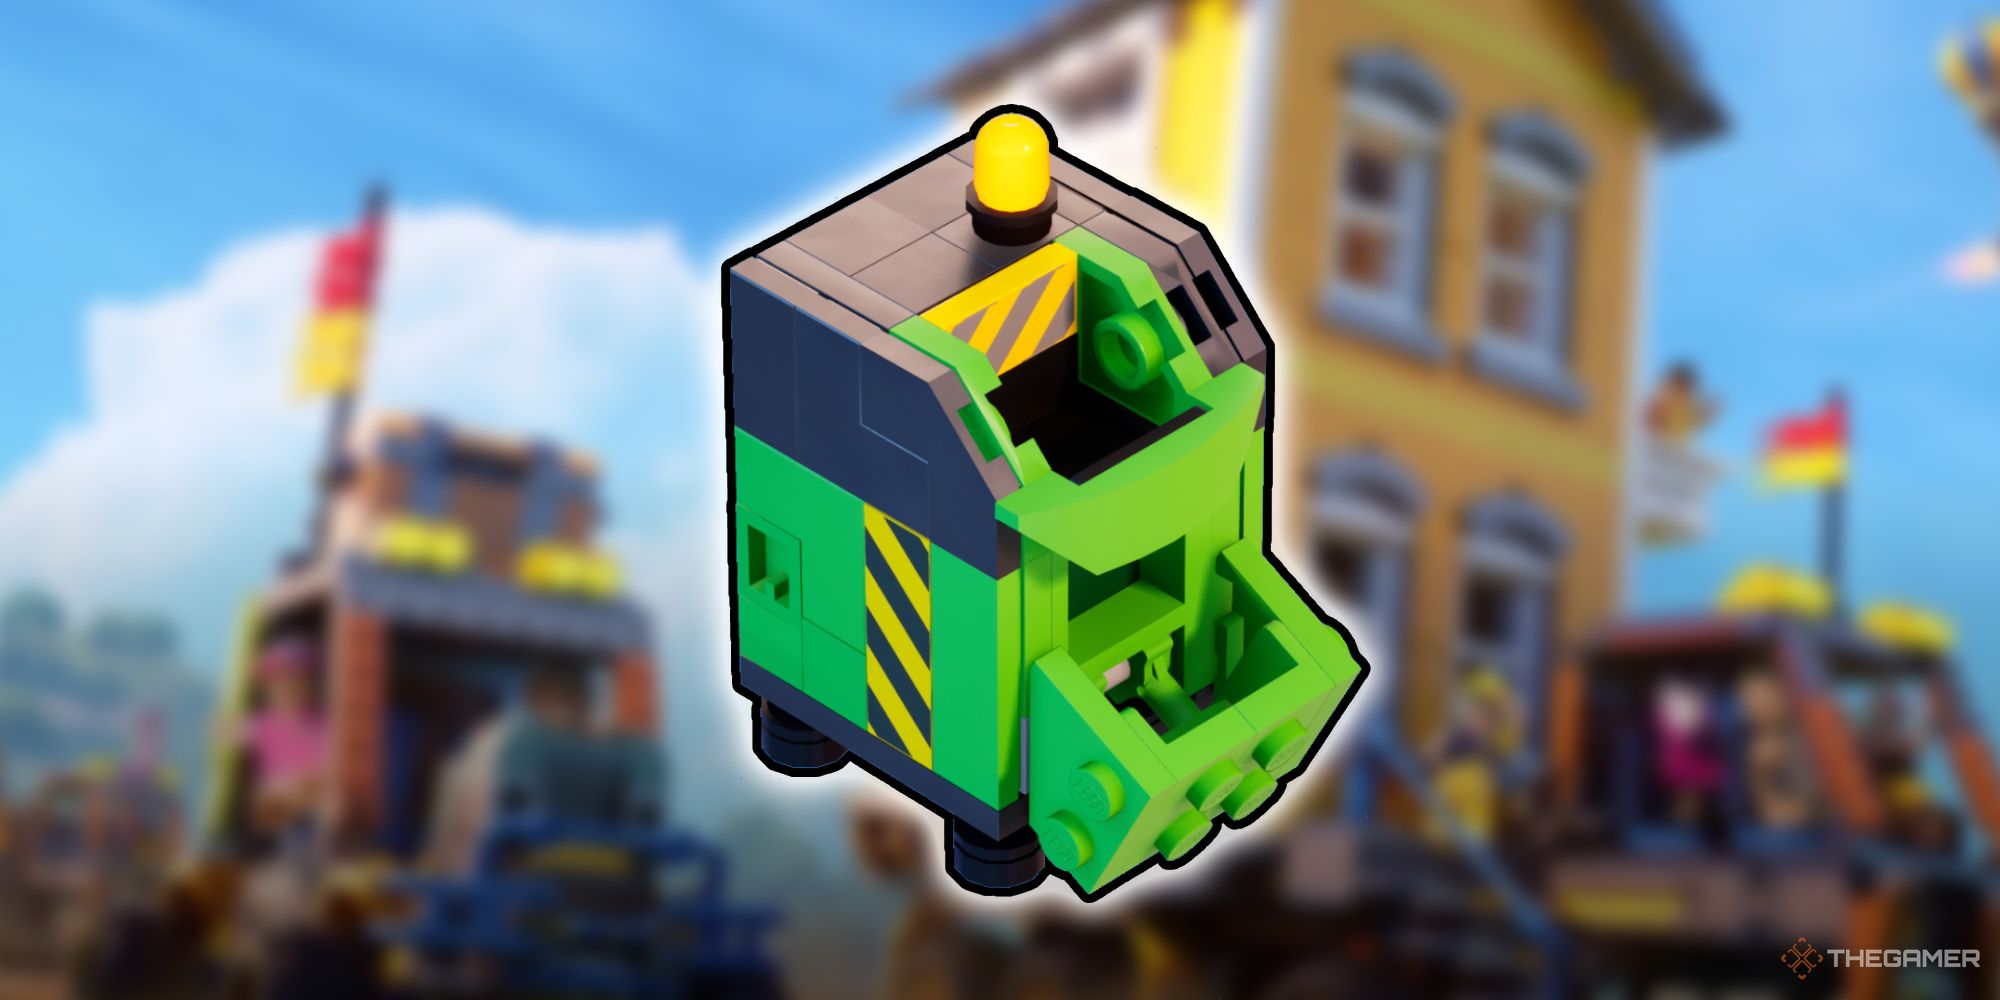 Cutout of Compost Bin from Lego Fortnite overtop of a blurry background.